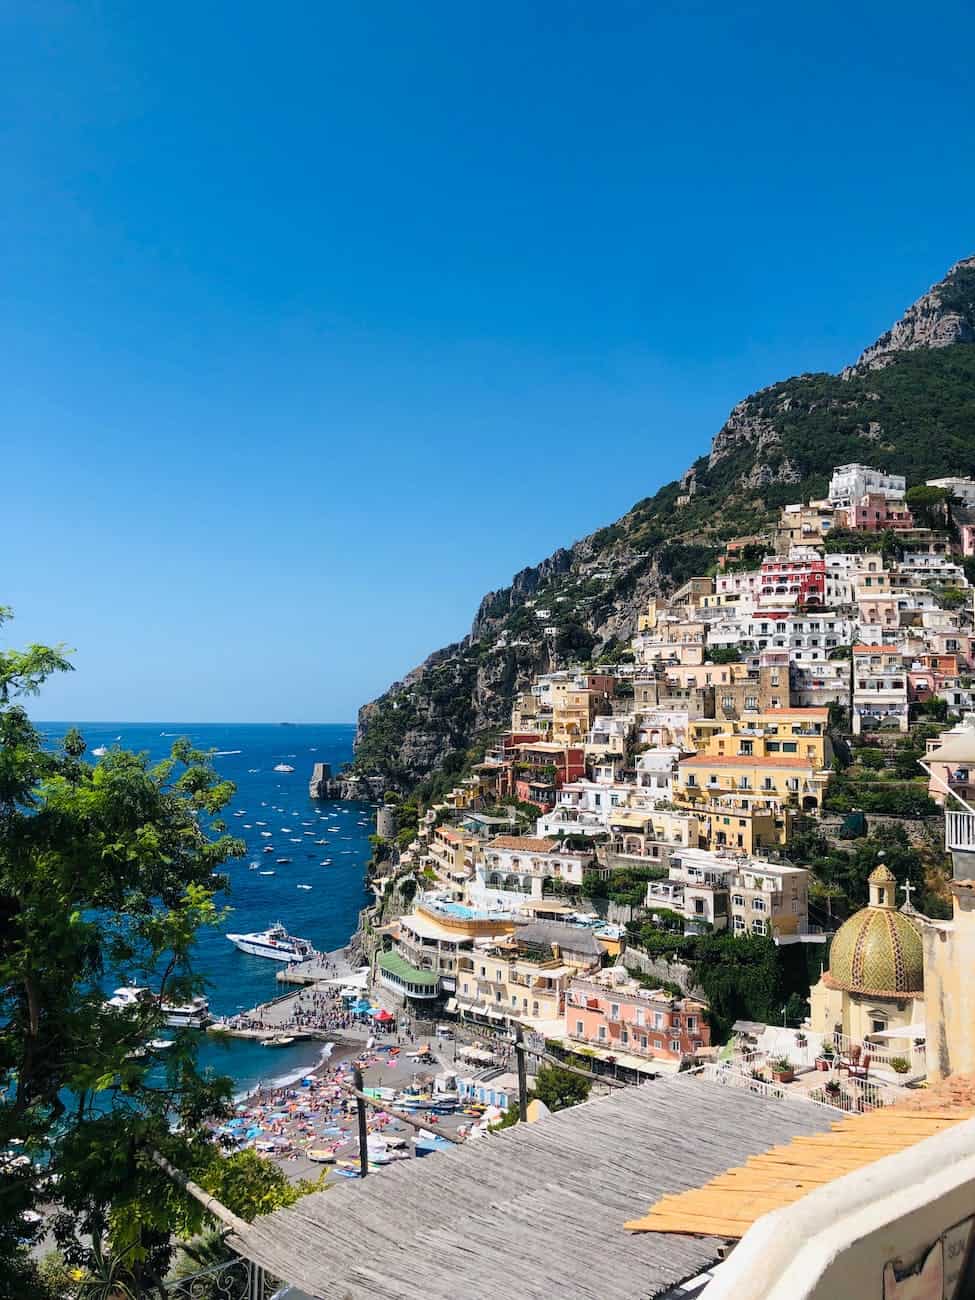 Things to Do For Kids in Positano